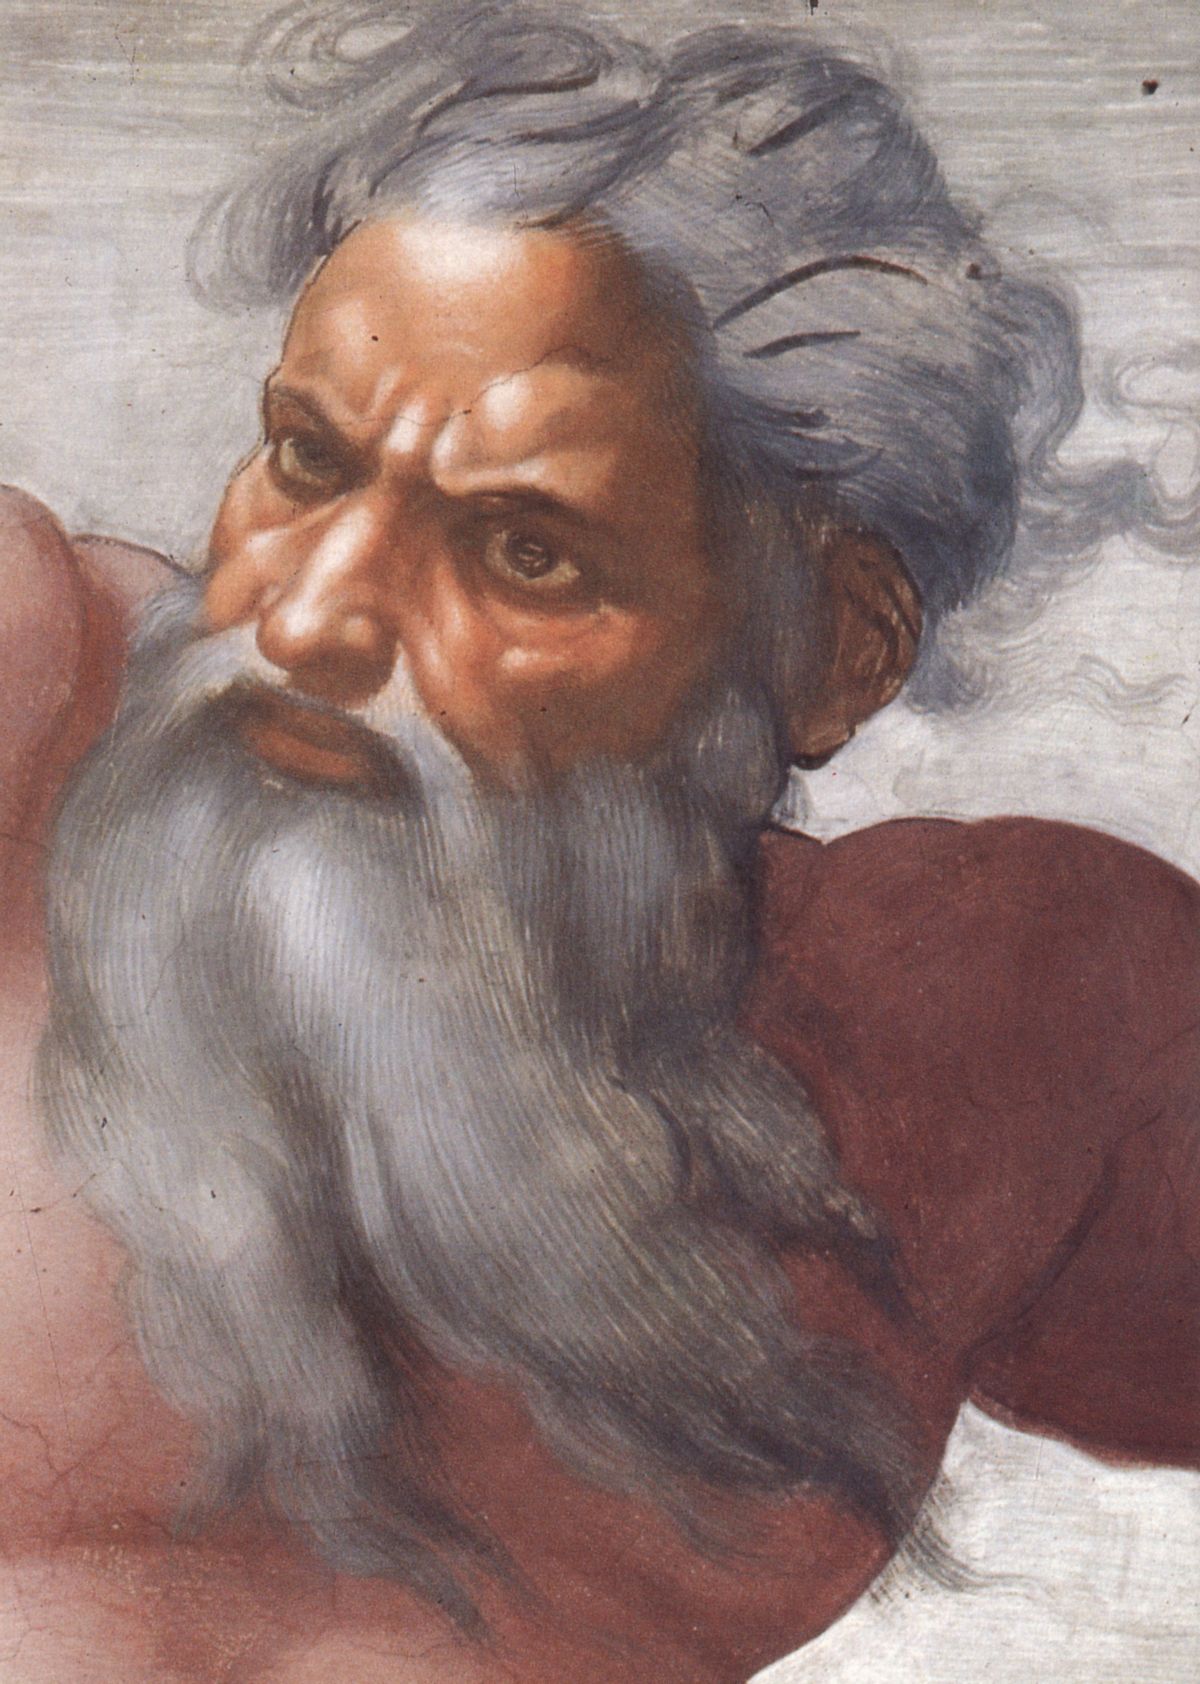 God (depicted here by Michelangelo) spreads his conservative endorsements liberally